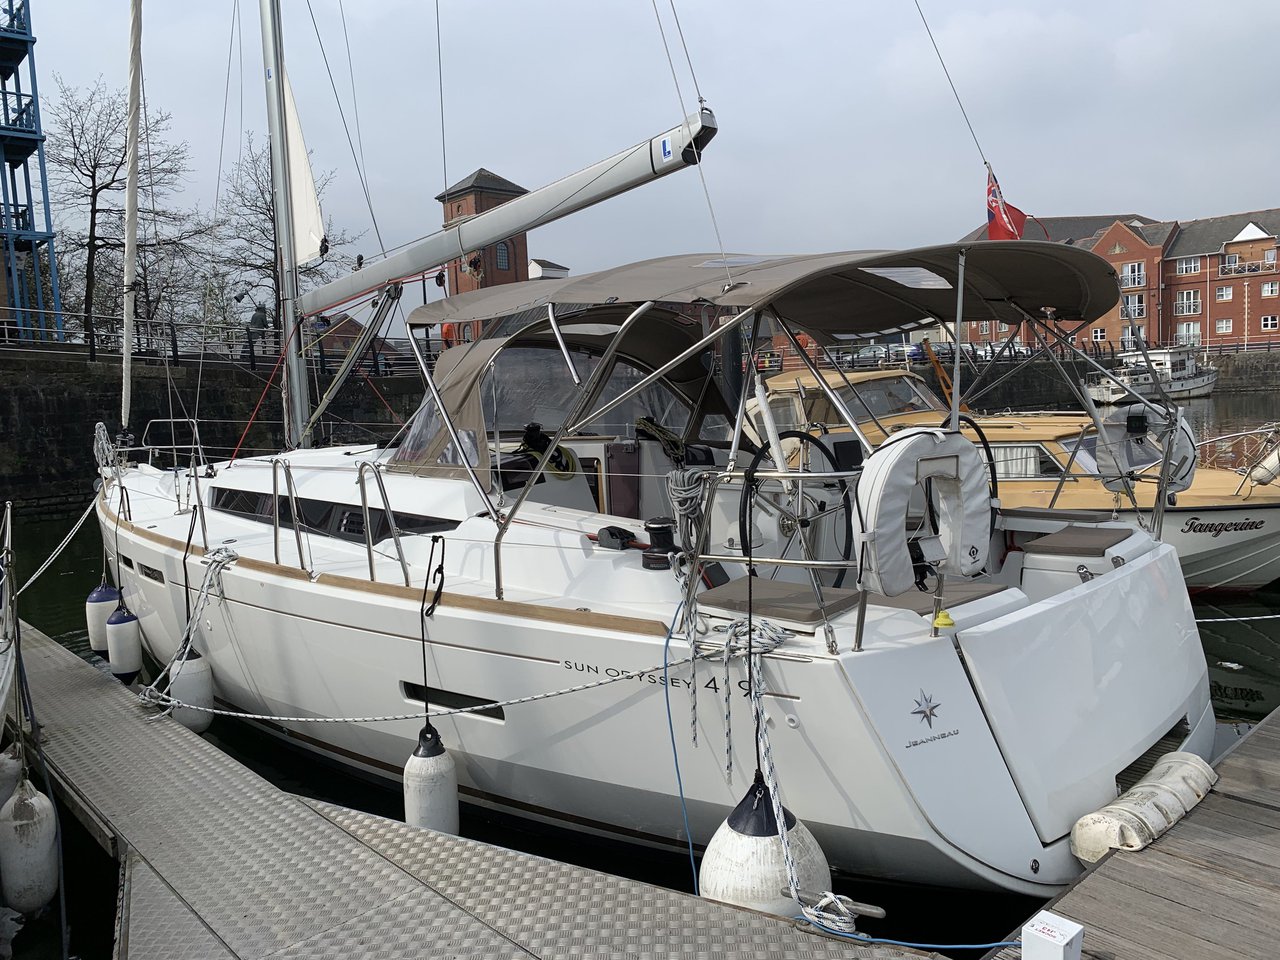 Sun Odyssey 419 - Sailboat Charter United Kingdom & Boat hire in United Kingdom Scotland Firth of Clyde Largs Largs Yacht Haven 1